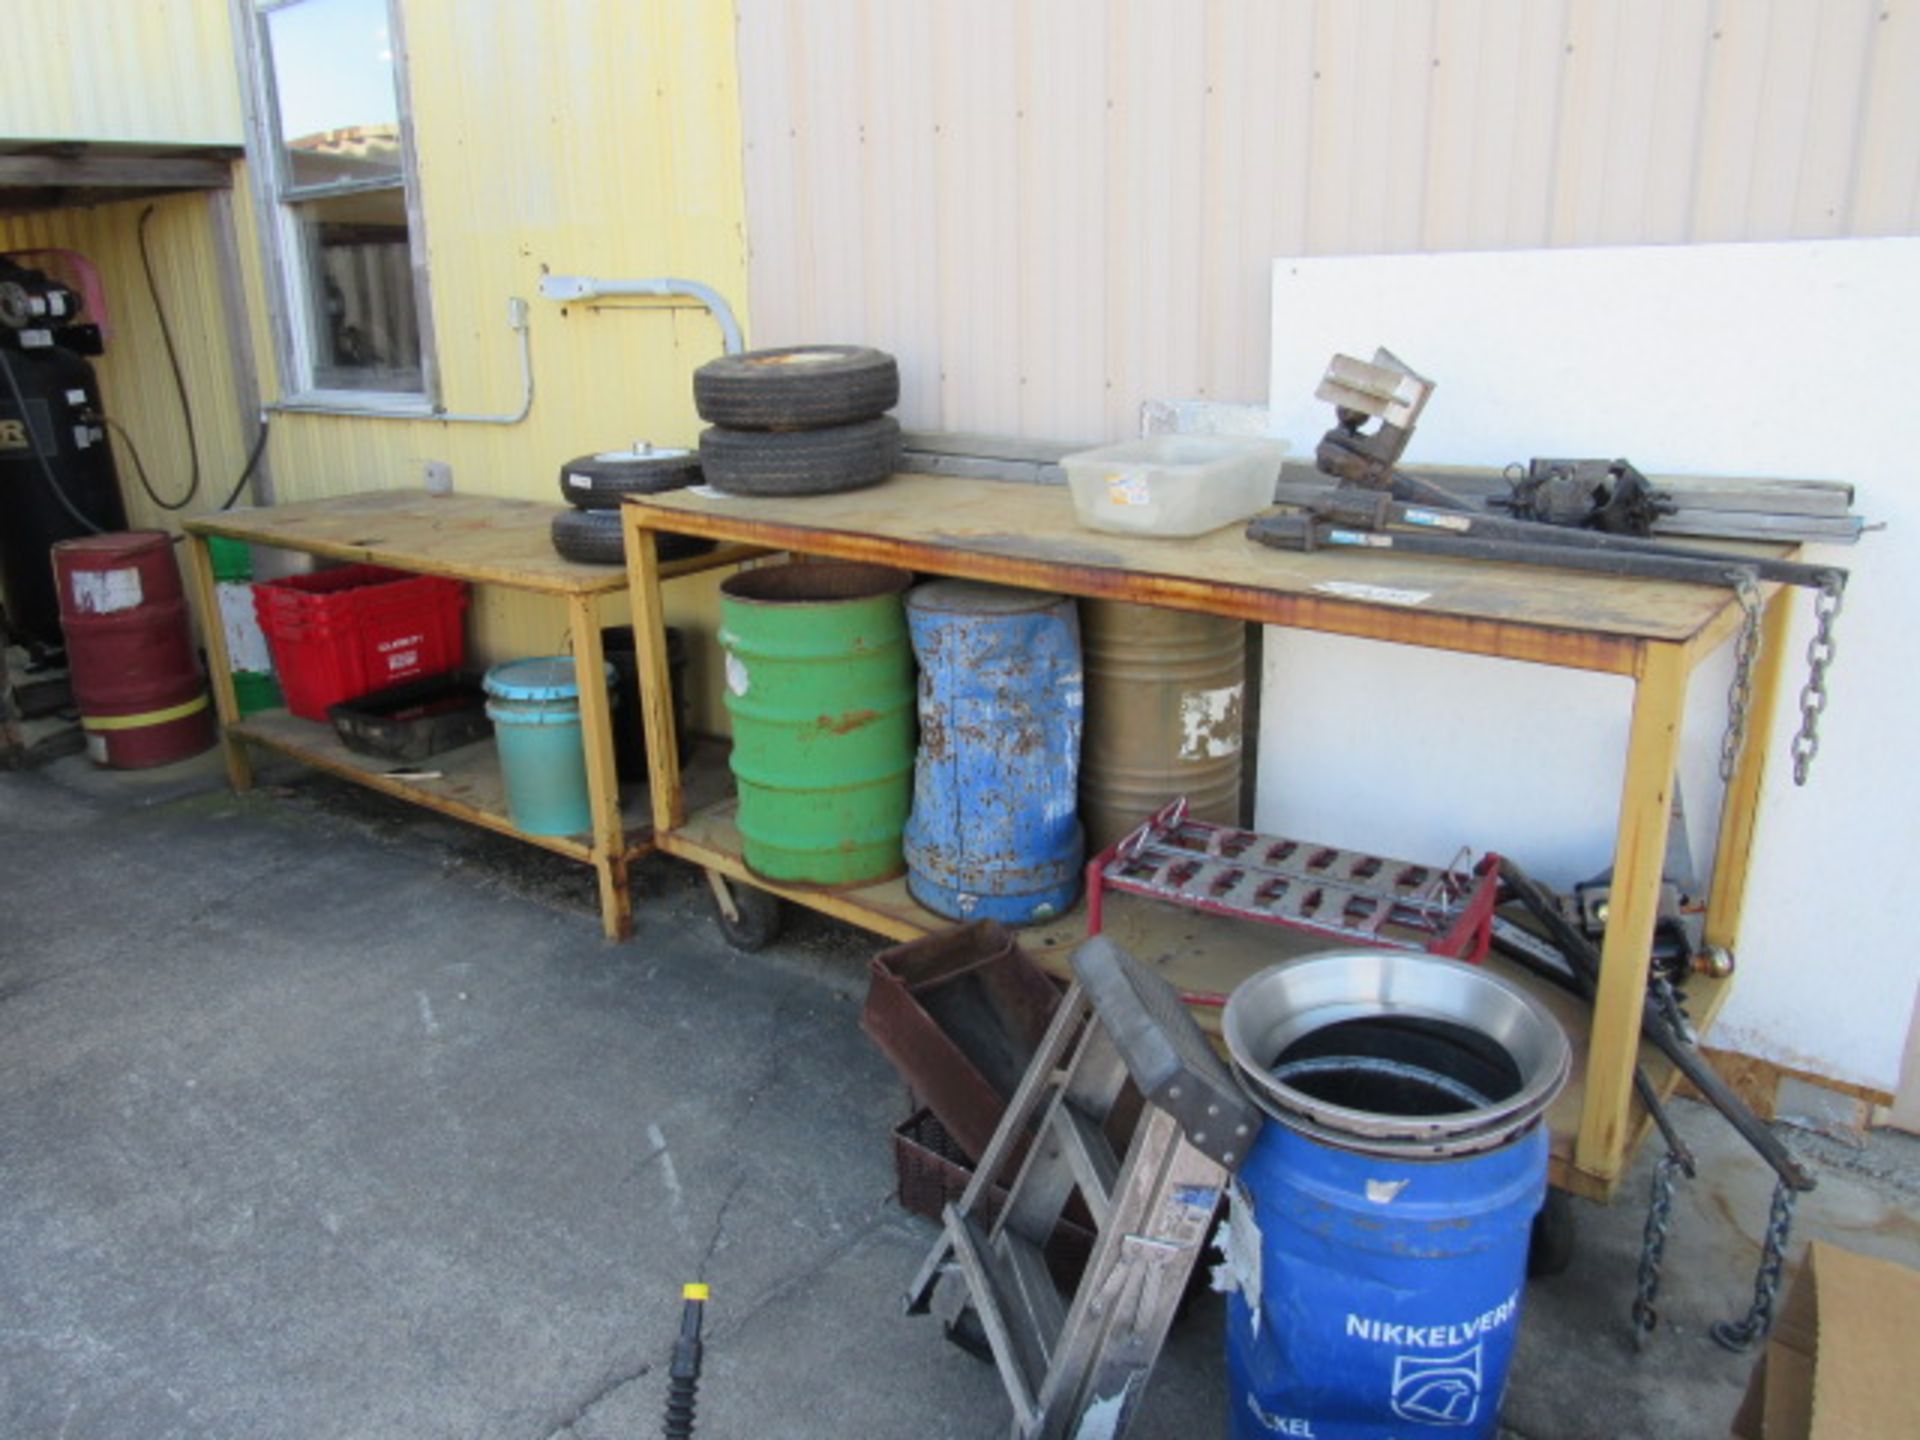 (2) Yellow Steel Work Benches (No Contents)